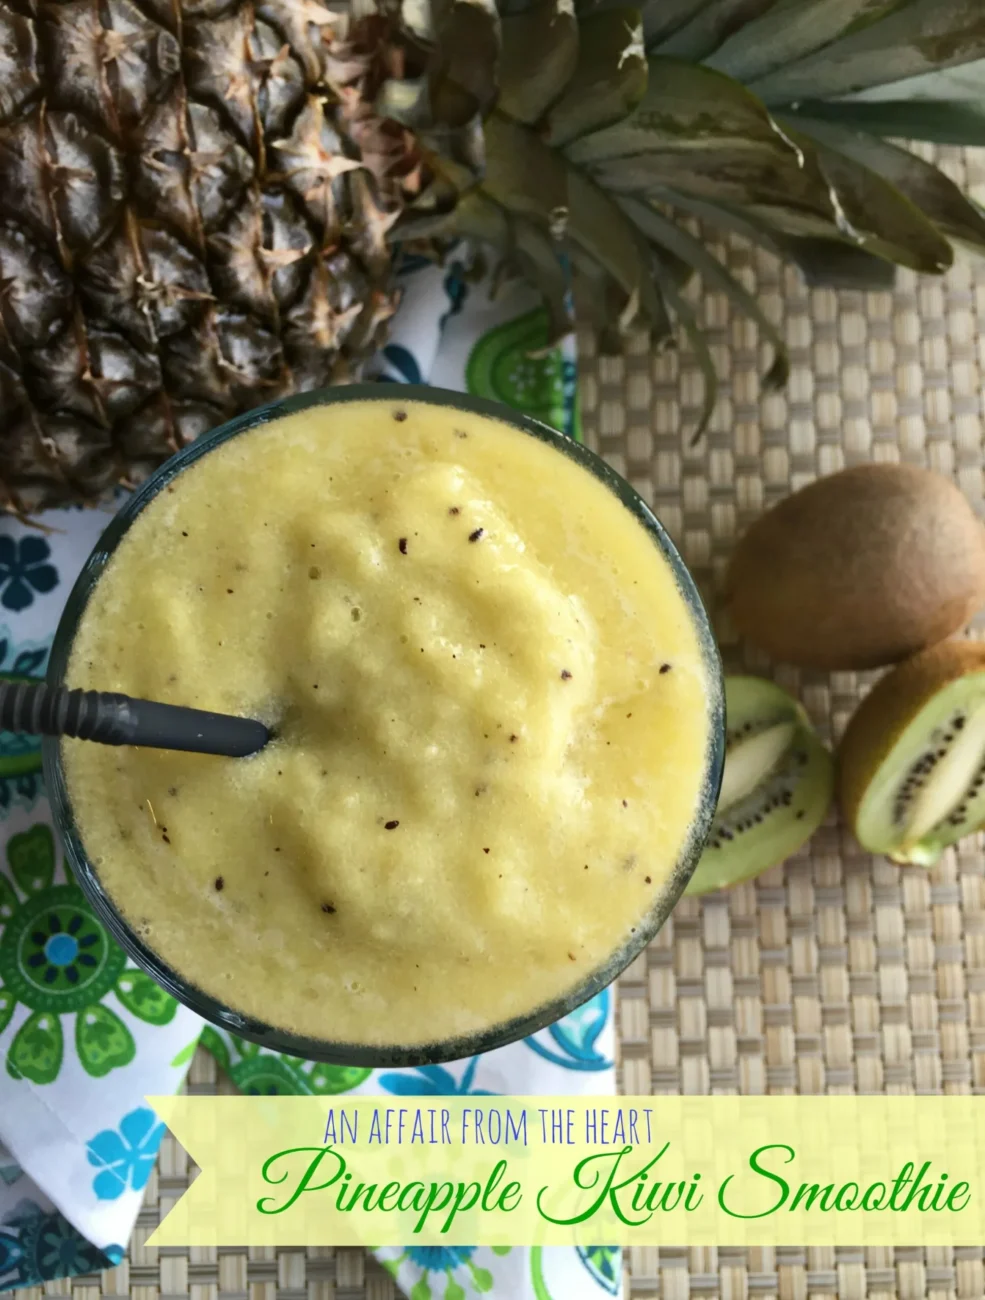 Pineapple And Kiwi Fruit Juice For Fresh And